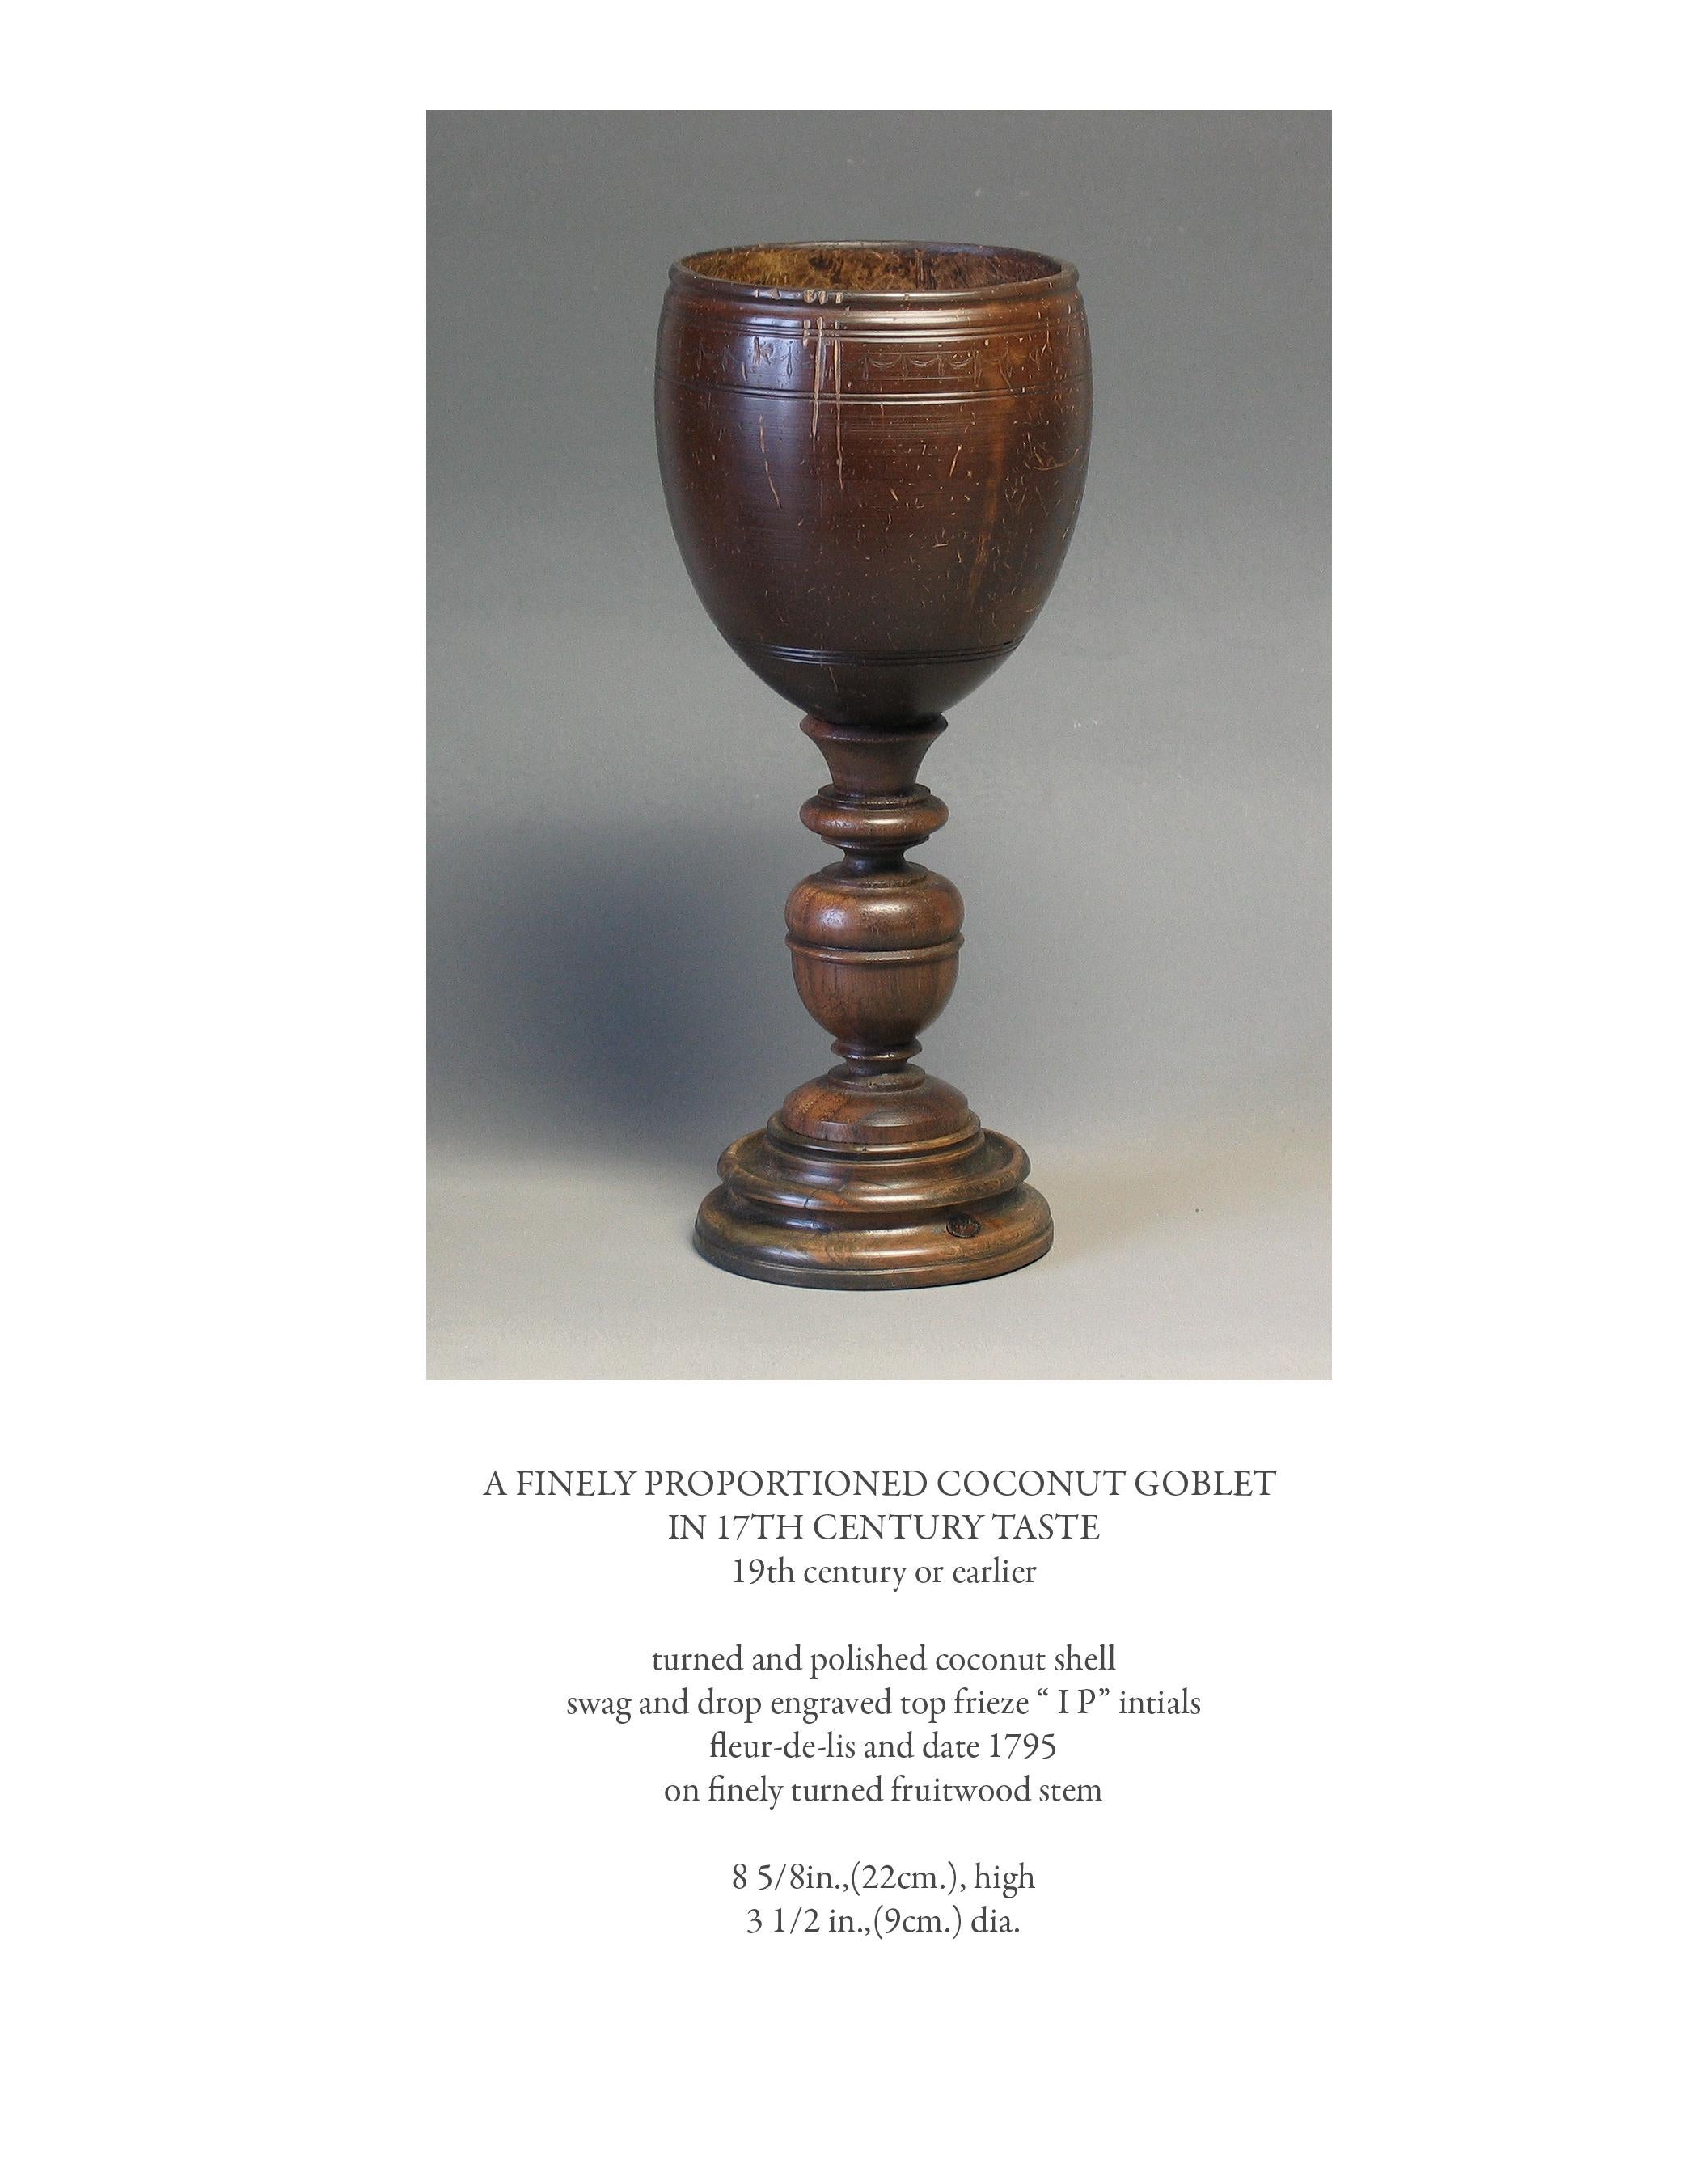 A finely proportioned coconut goblet in 17th century taste
19th century or earlier.

Turned and polished coconut shell,
swag and drop engraved top frieze, “ I P” intials,
fleur-de-lis and date 1795,
on finely turned fruitwood